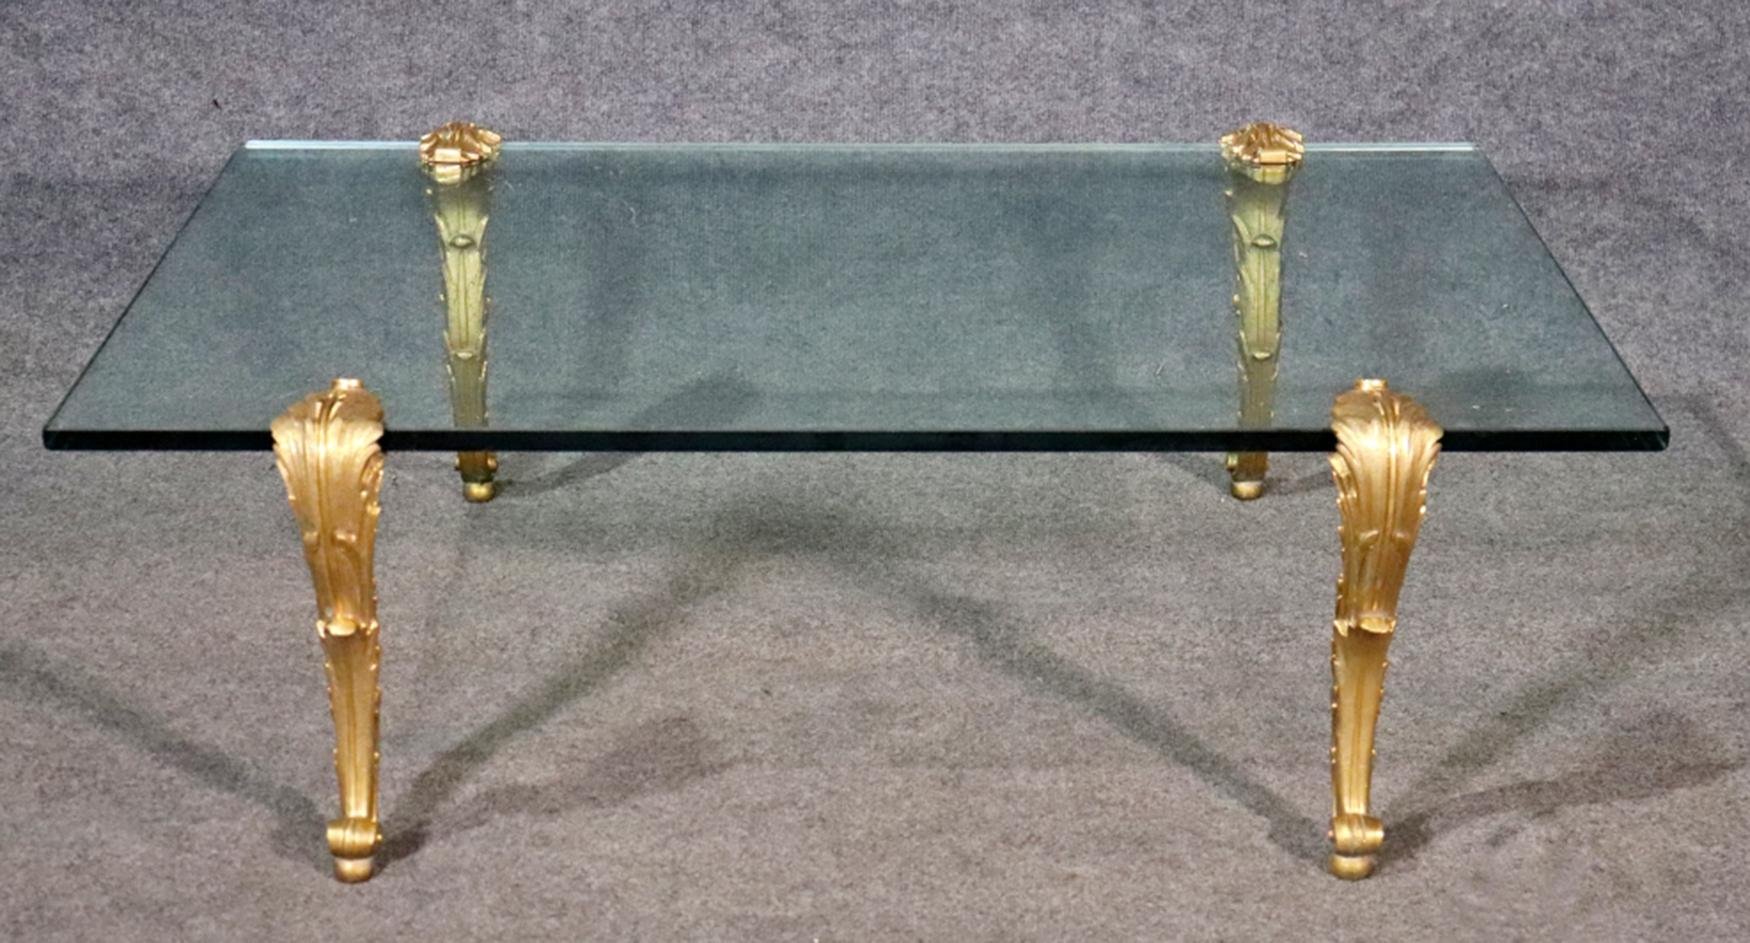 This coffee table was made by America's oldest metals foundry in New York City. The casting quality of P.E. Geurin is possibly some of the finest in the world and definitely the finest in the USA. This table measures 15